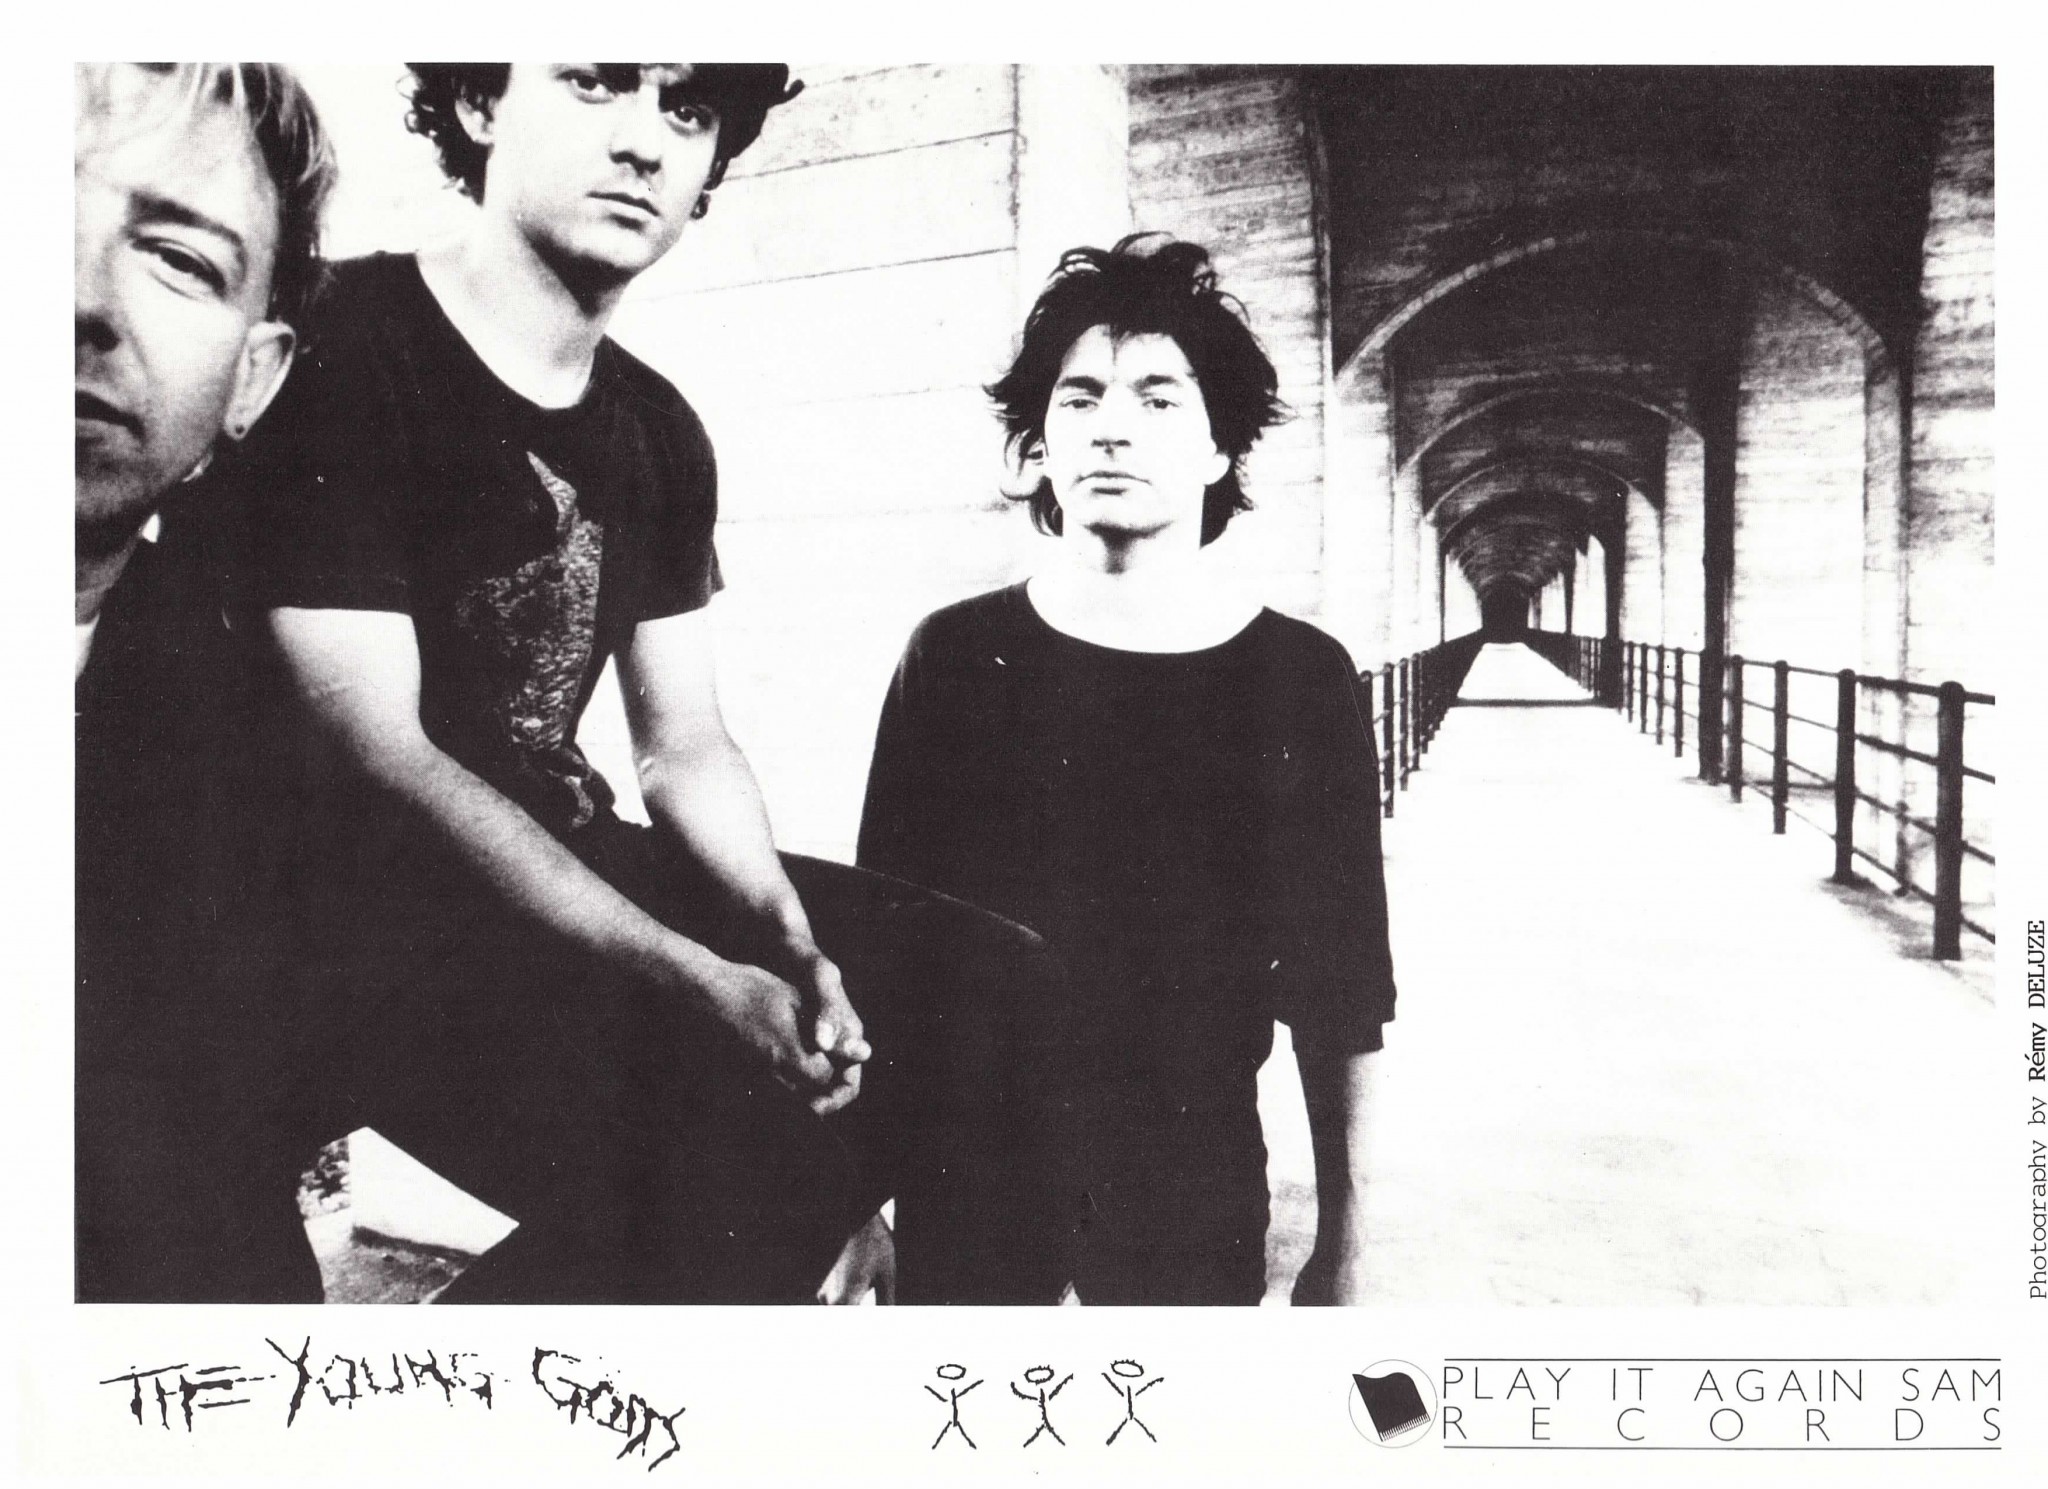 1990, The Young Gods, © Remy Deluze